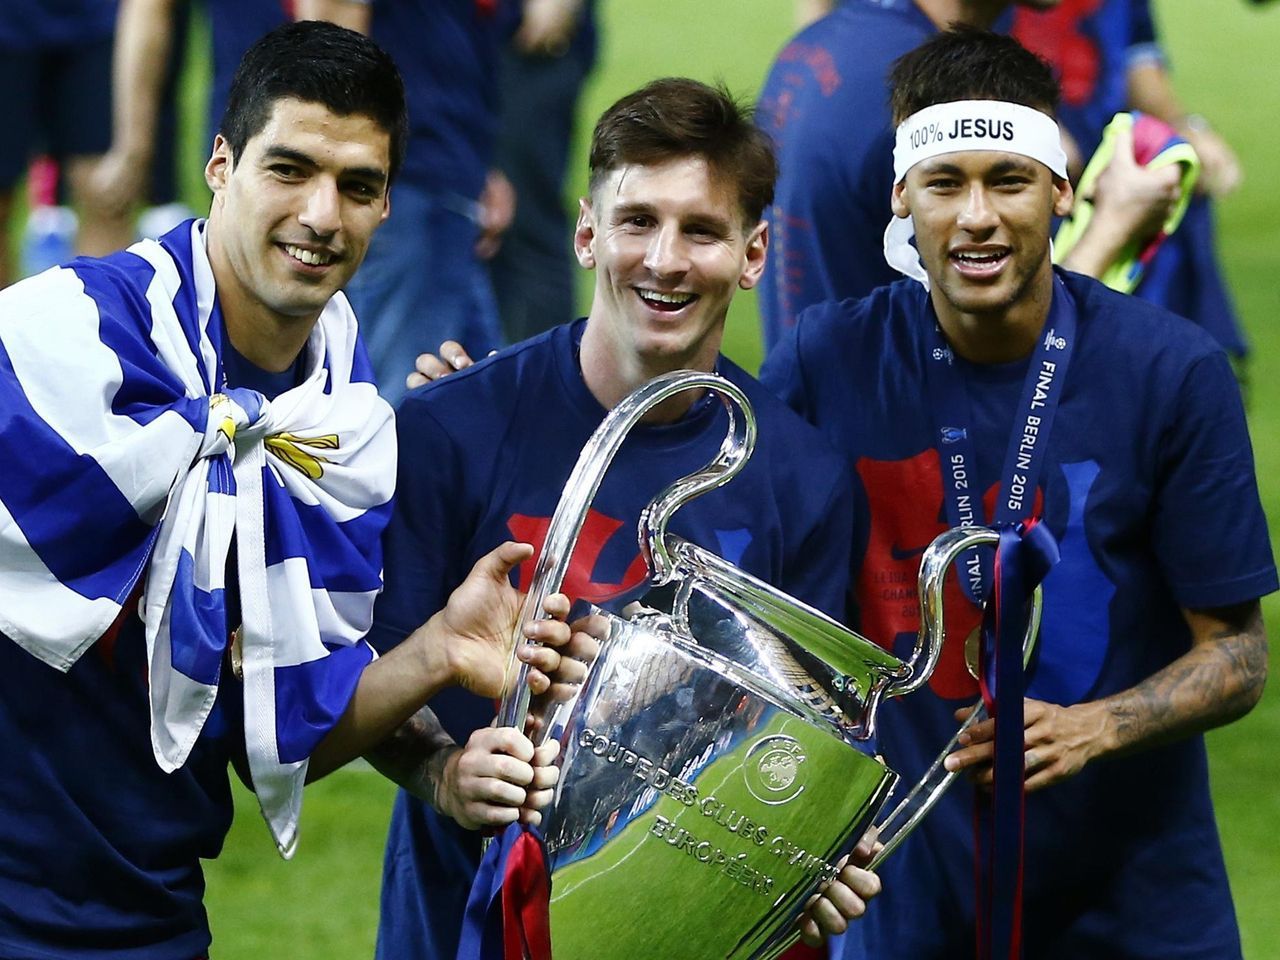 Does any attacking force in history compare to Barcelona's Lionel Messi, Neymar and Luis Suarez?